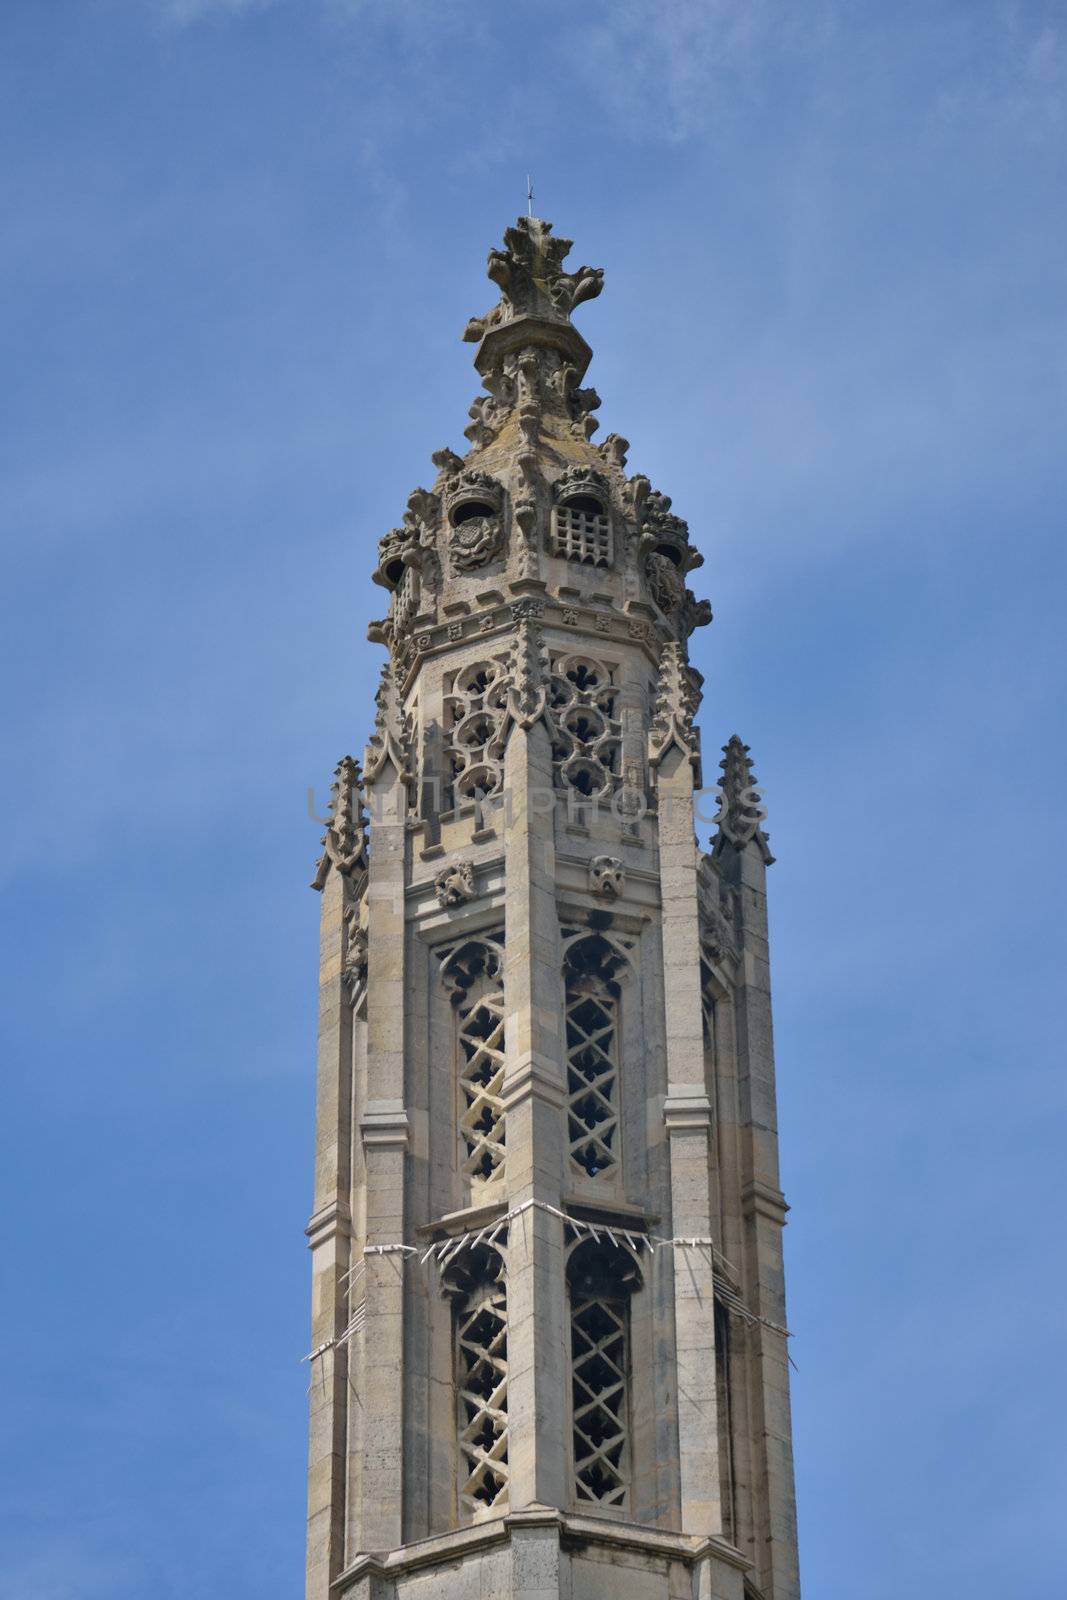 Kings college spire by pauws99